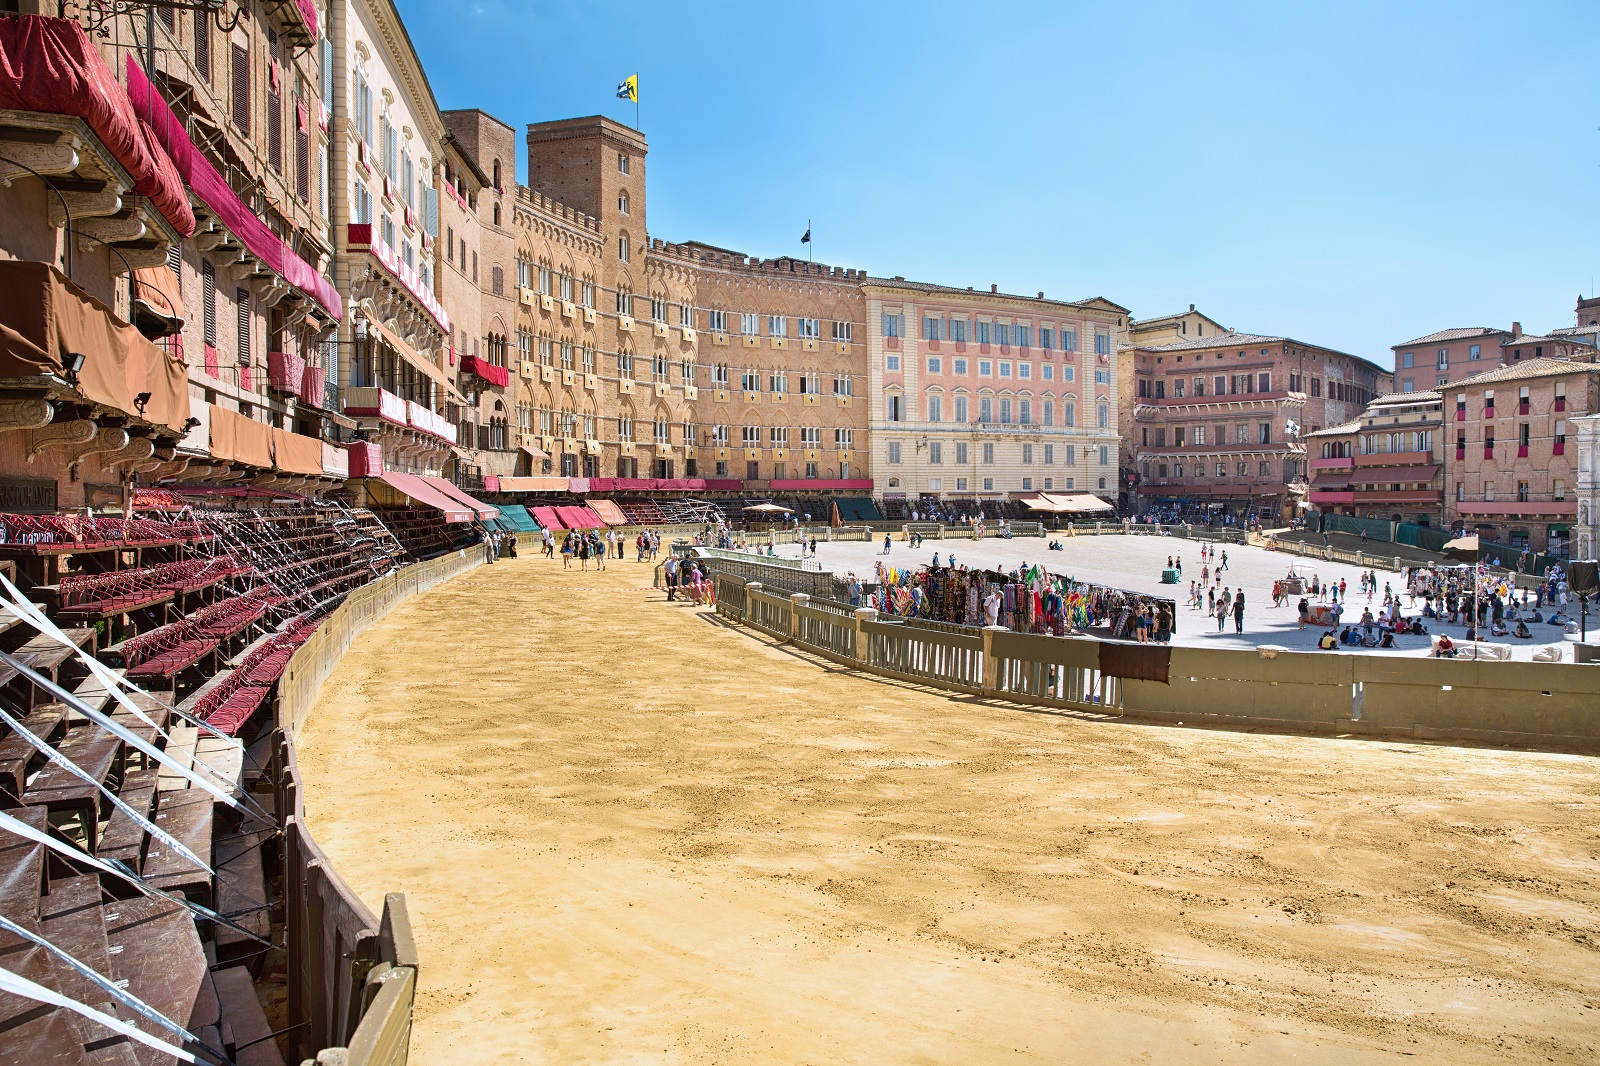 Piazza del Campo, Siena, setting up for the Palio